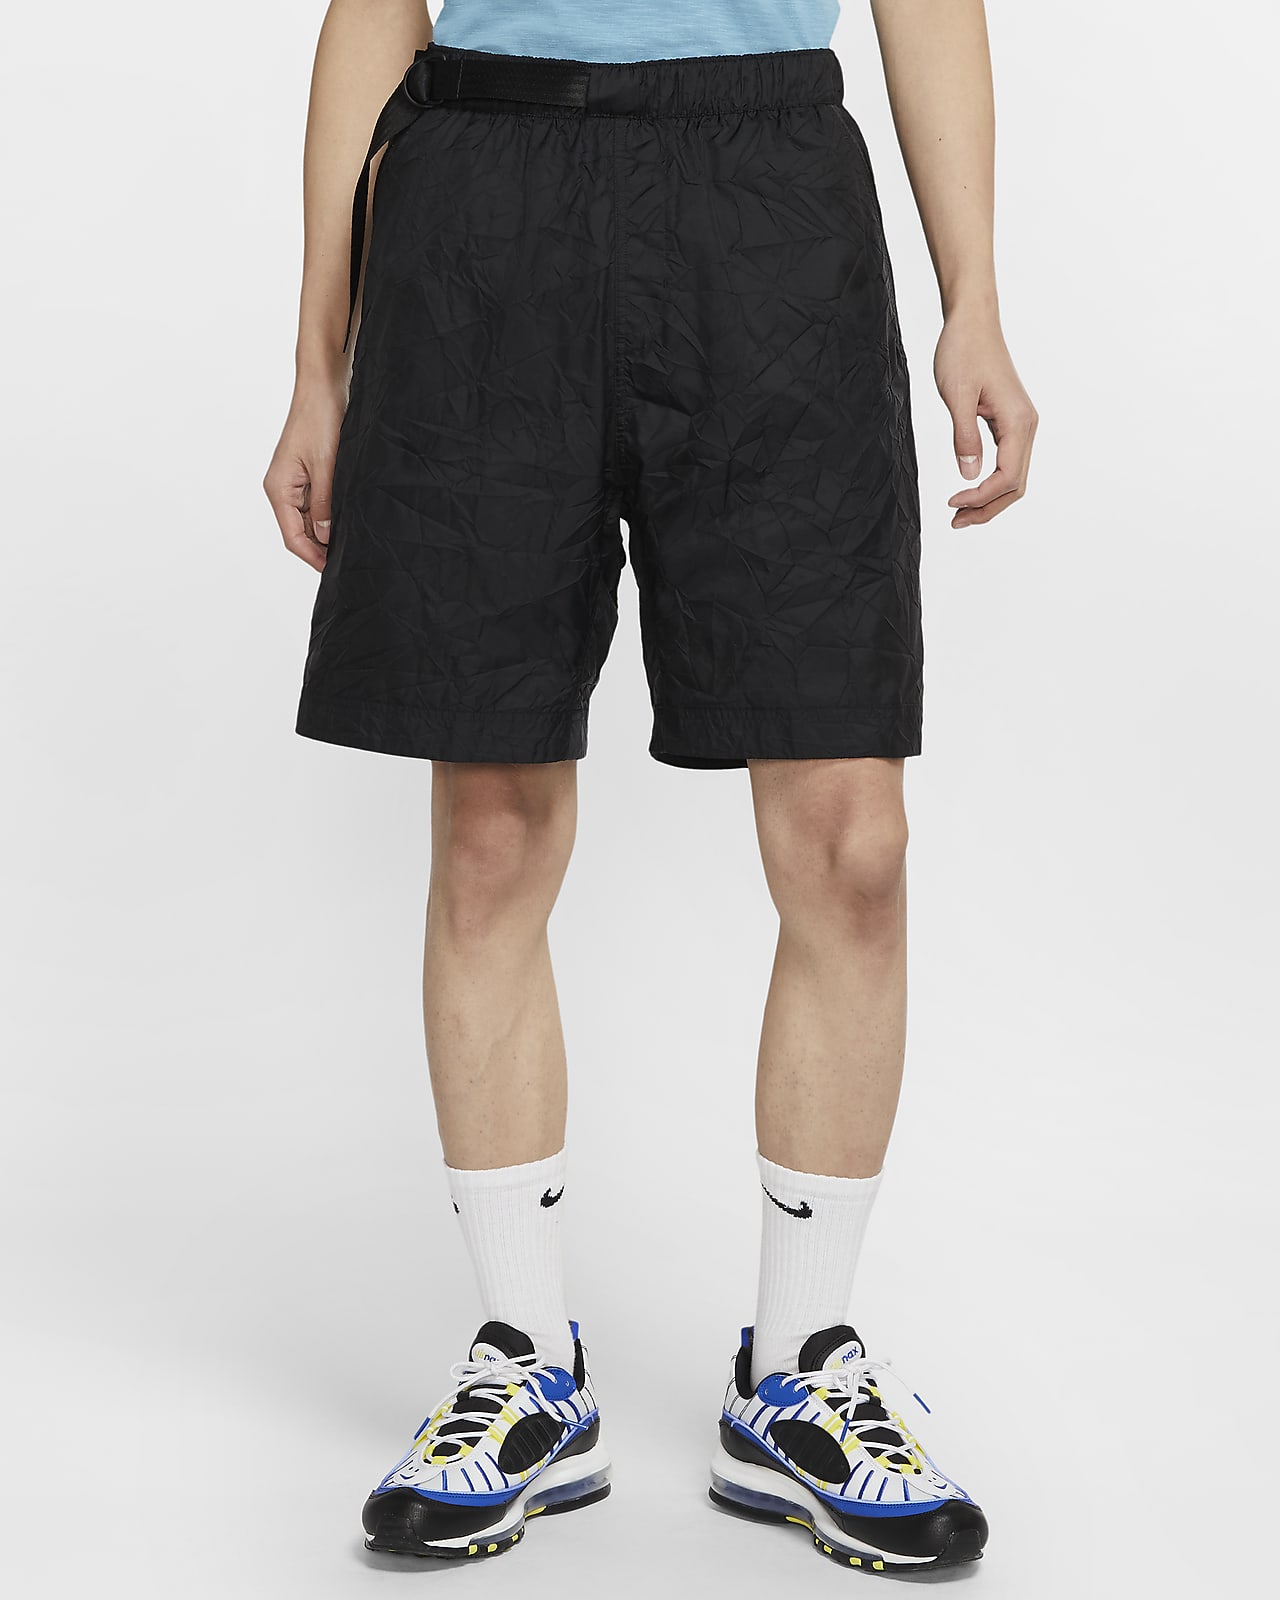 nike men's shorts with liner